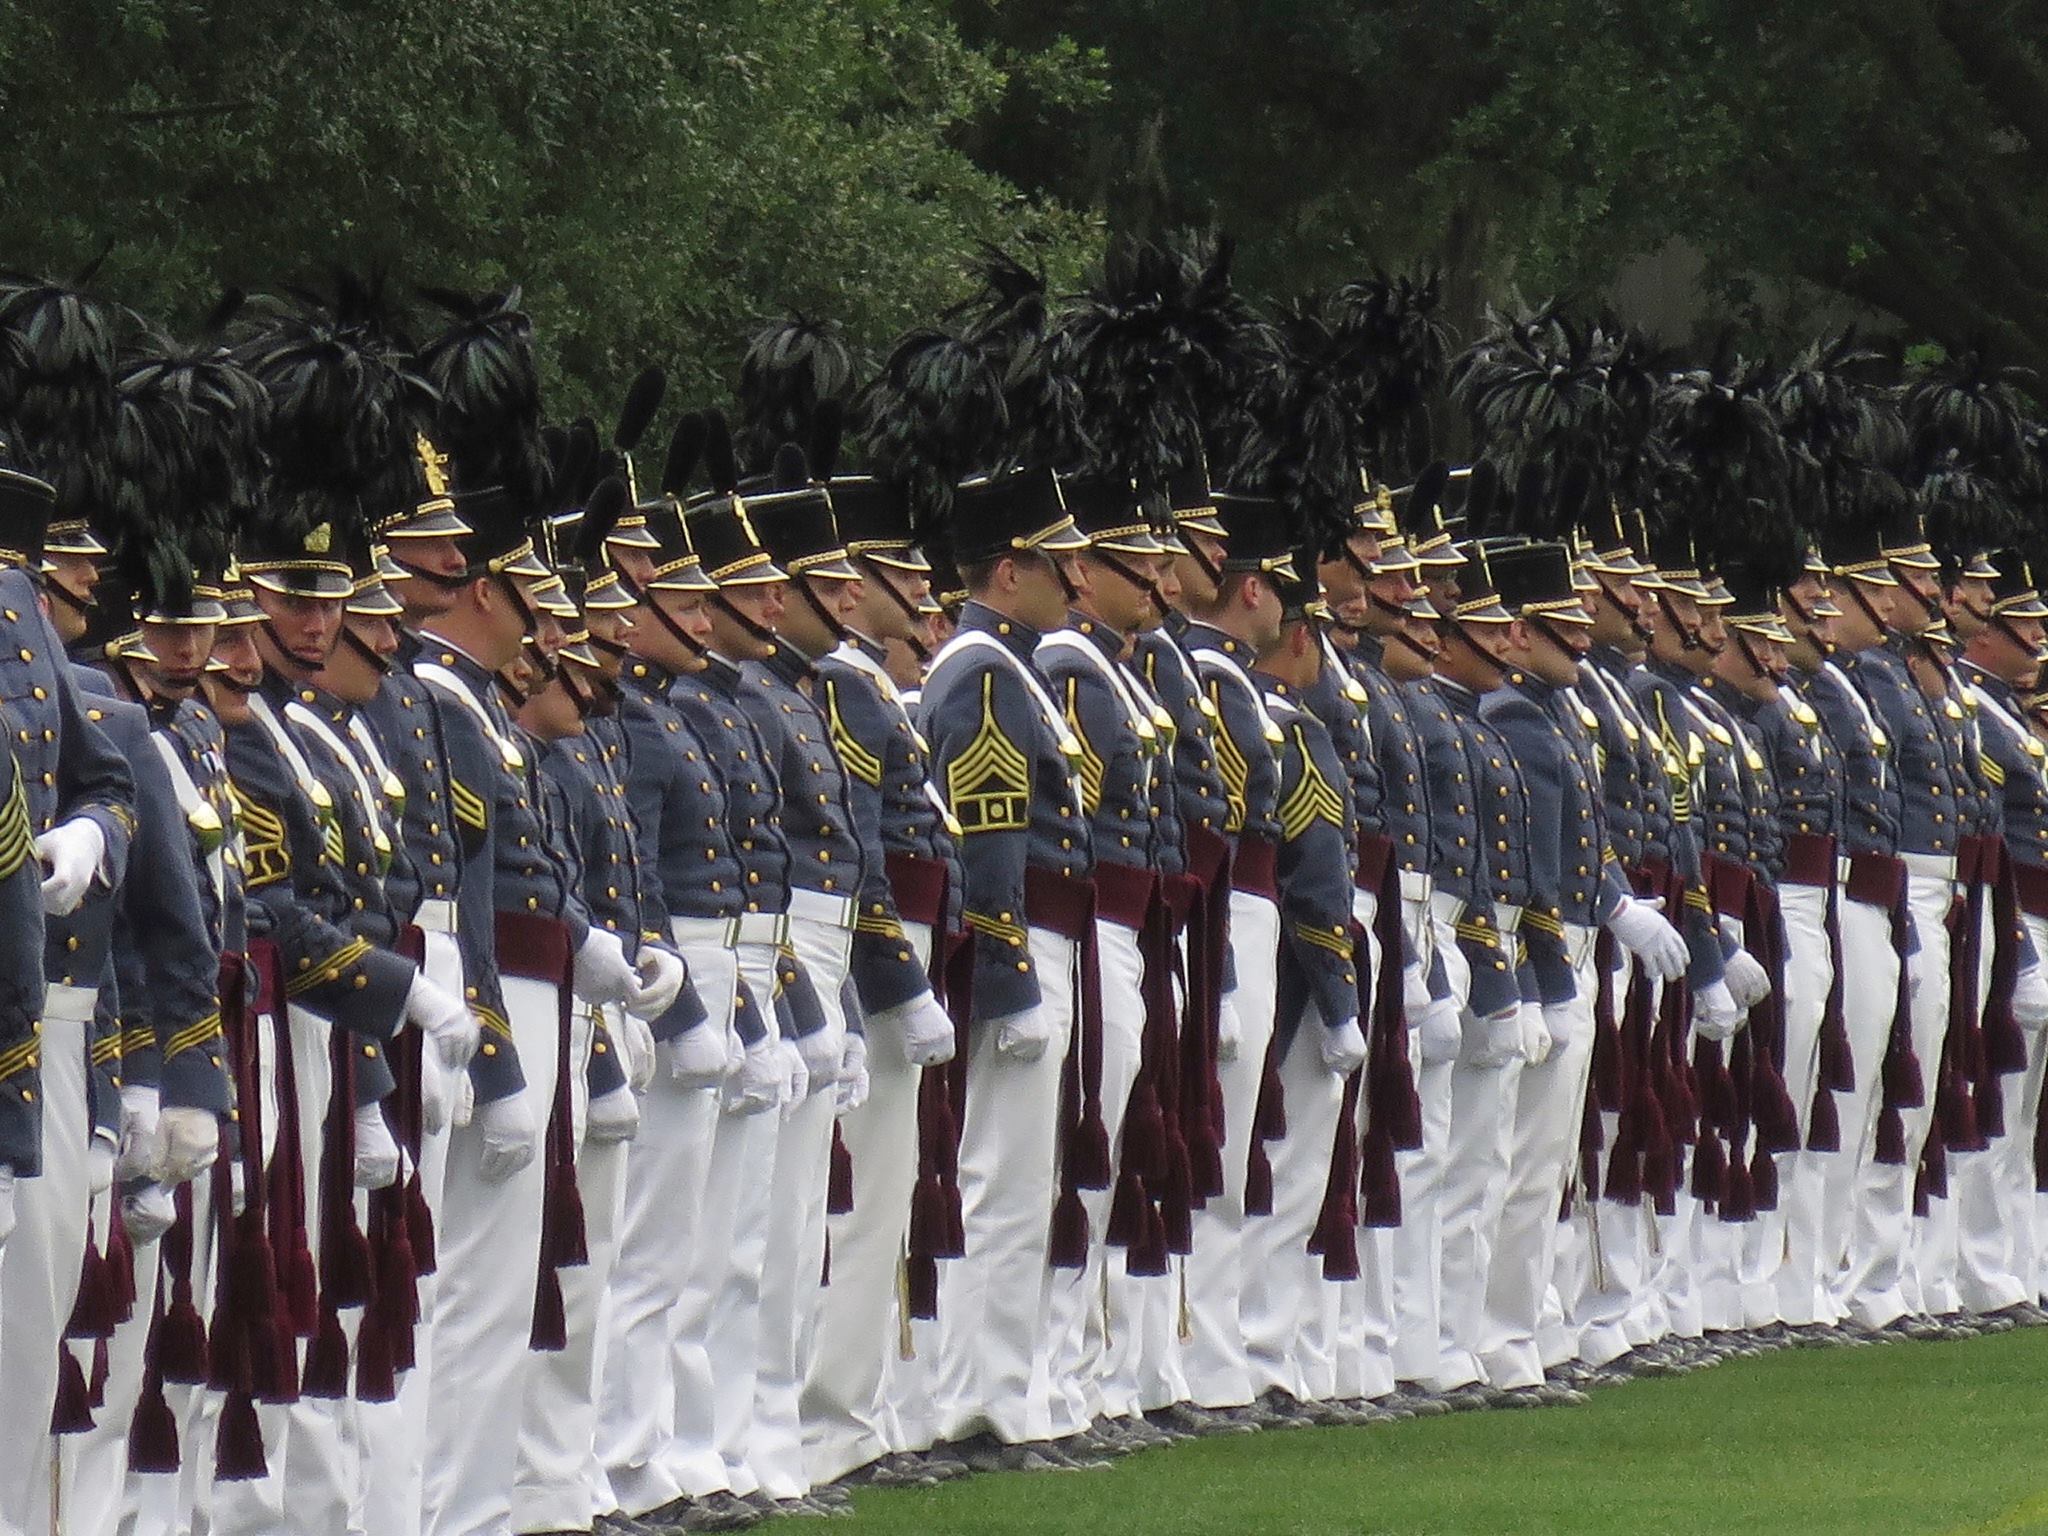 Members of the Class of 2015 turn to face the Corps of Cadets.